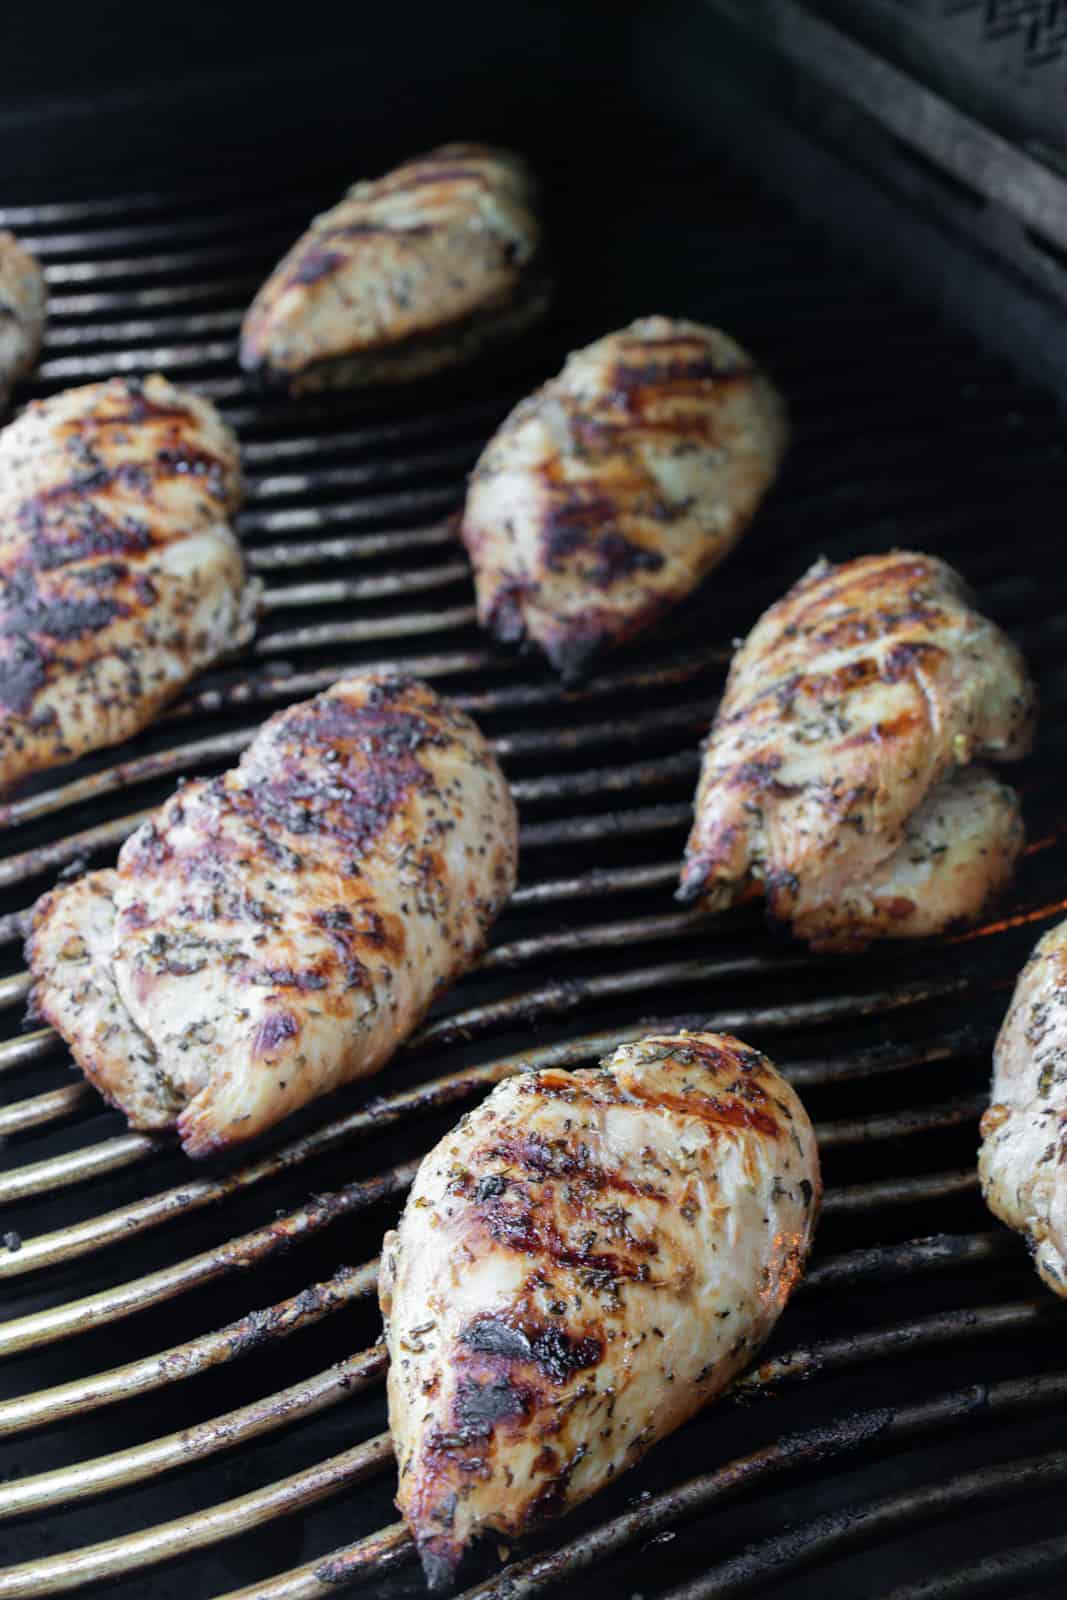 Grilled chicken breasts on the BBQ.